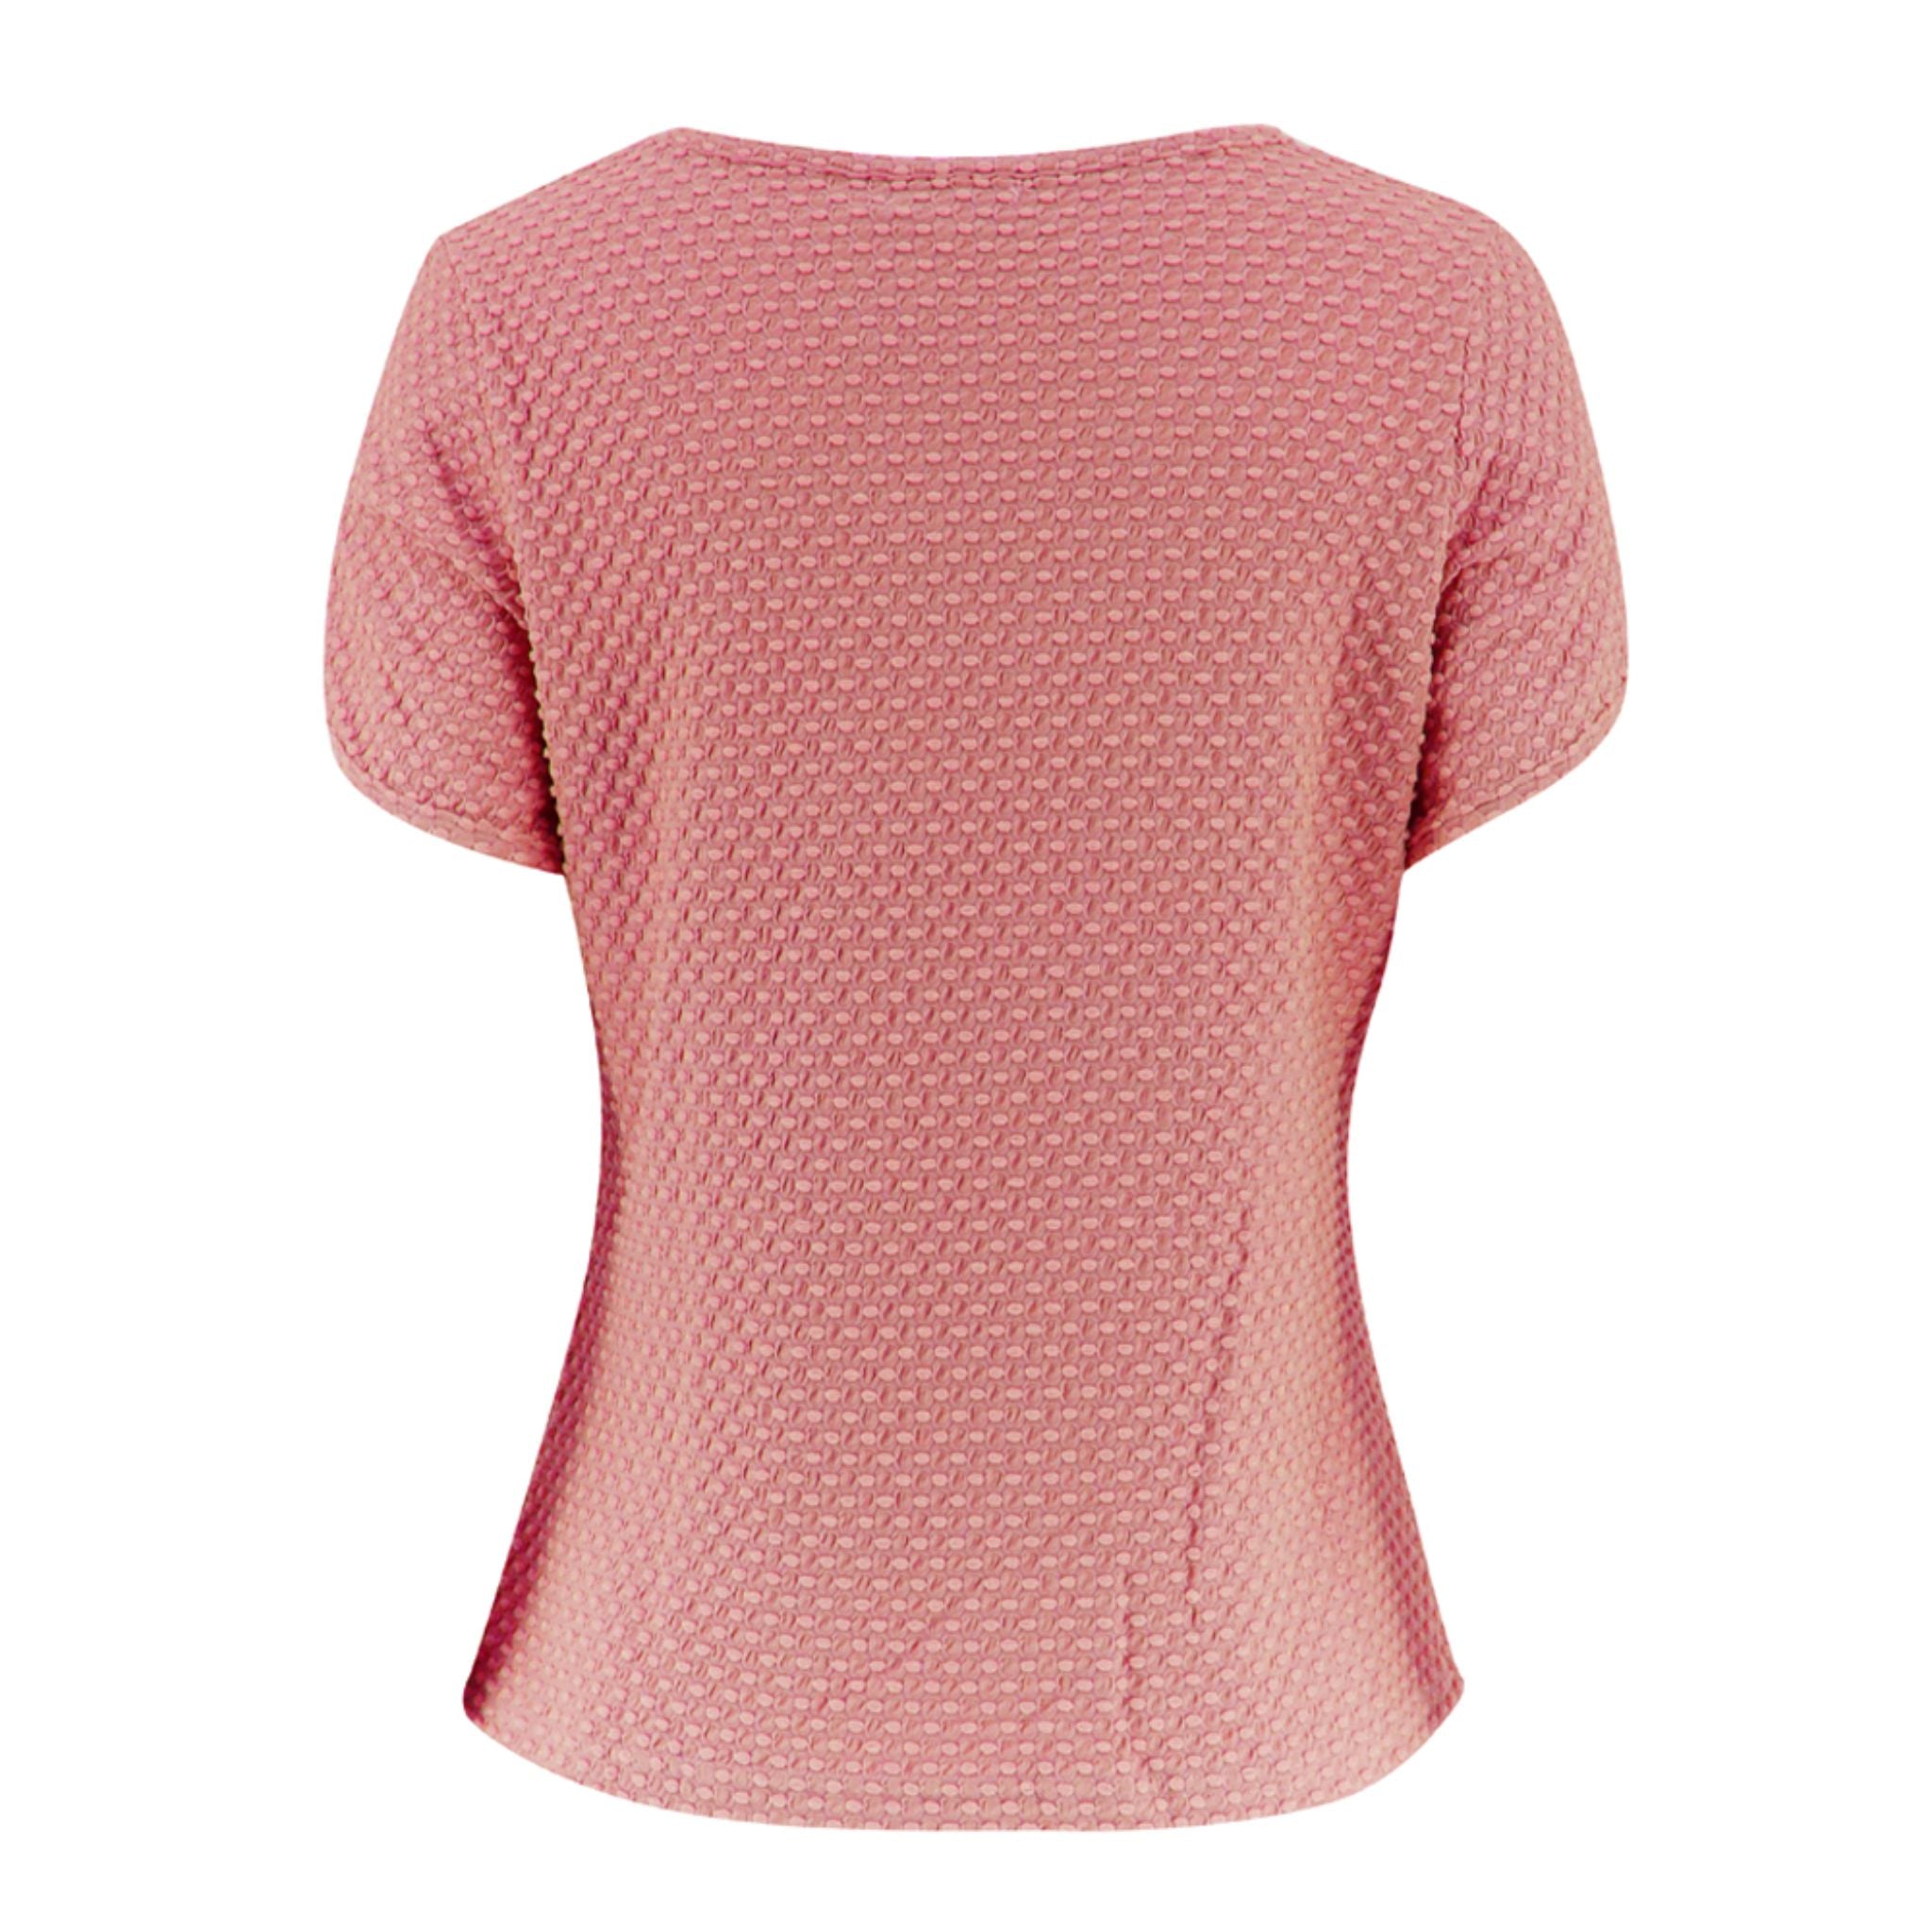 Tune up Overlap Sleeve Blouse - Pink